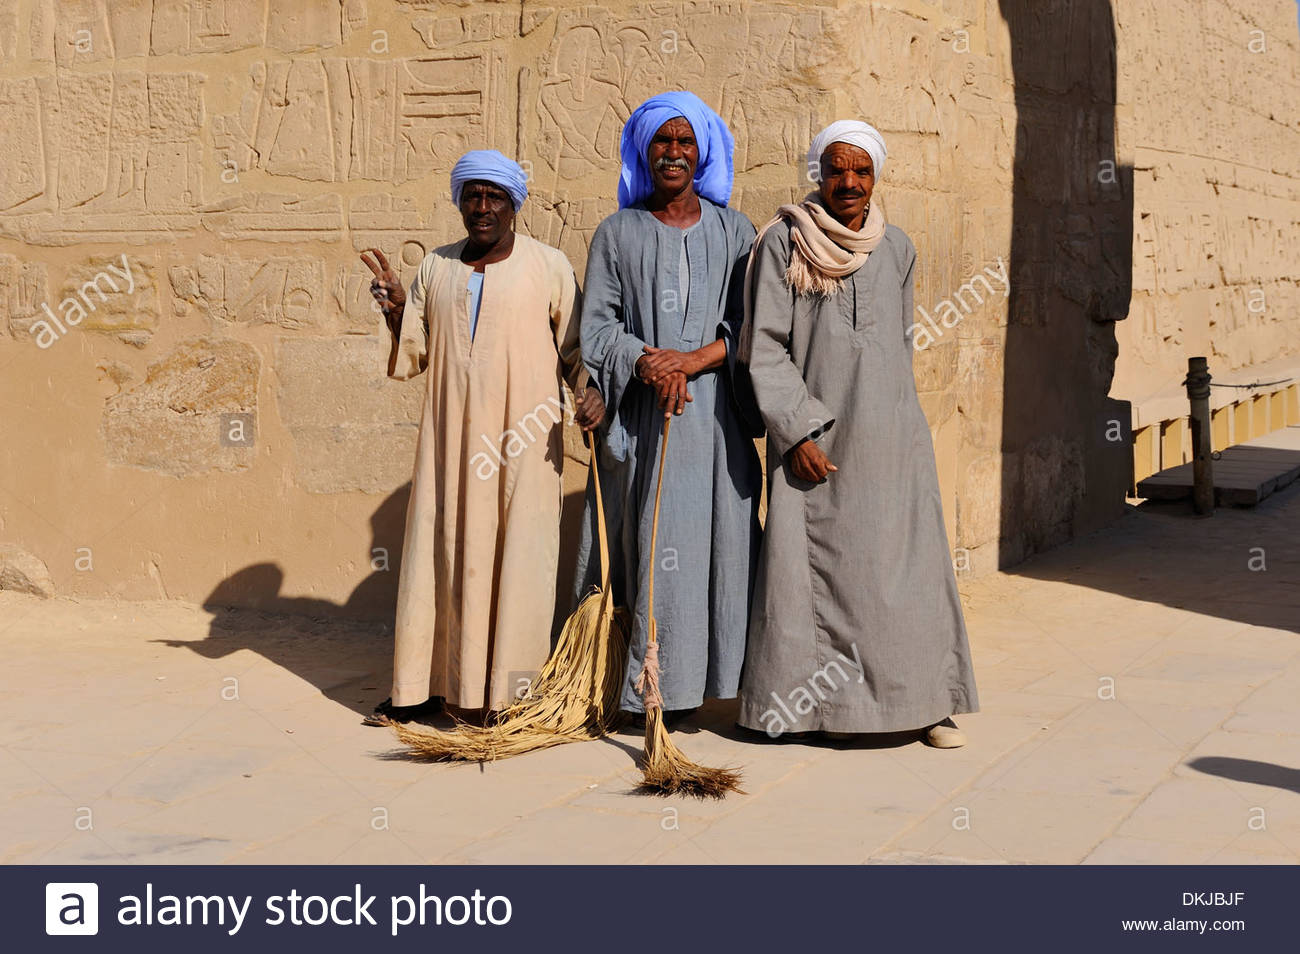 locals-at-entrance-to-central-court-karnak-temple-luxor-egypt-DKJBJF.jpg